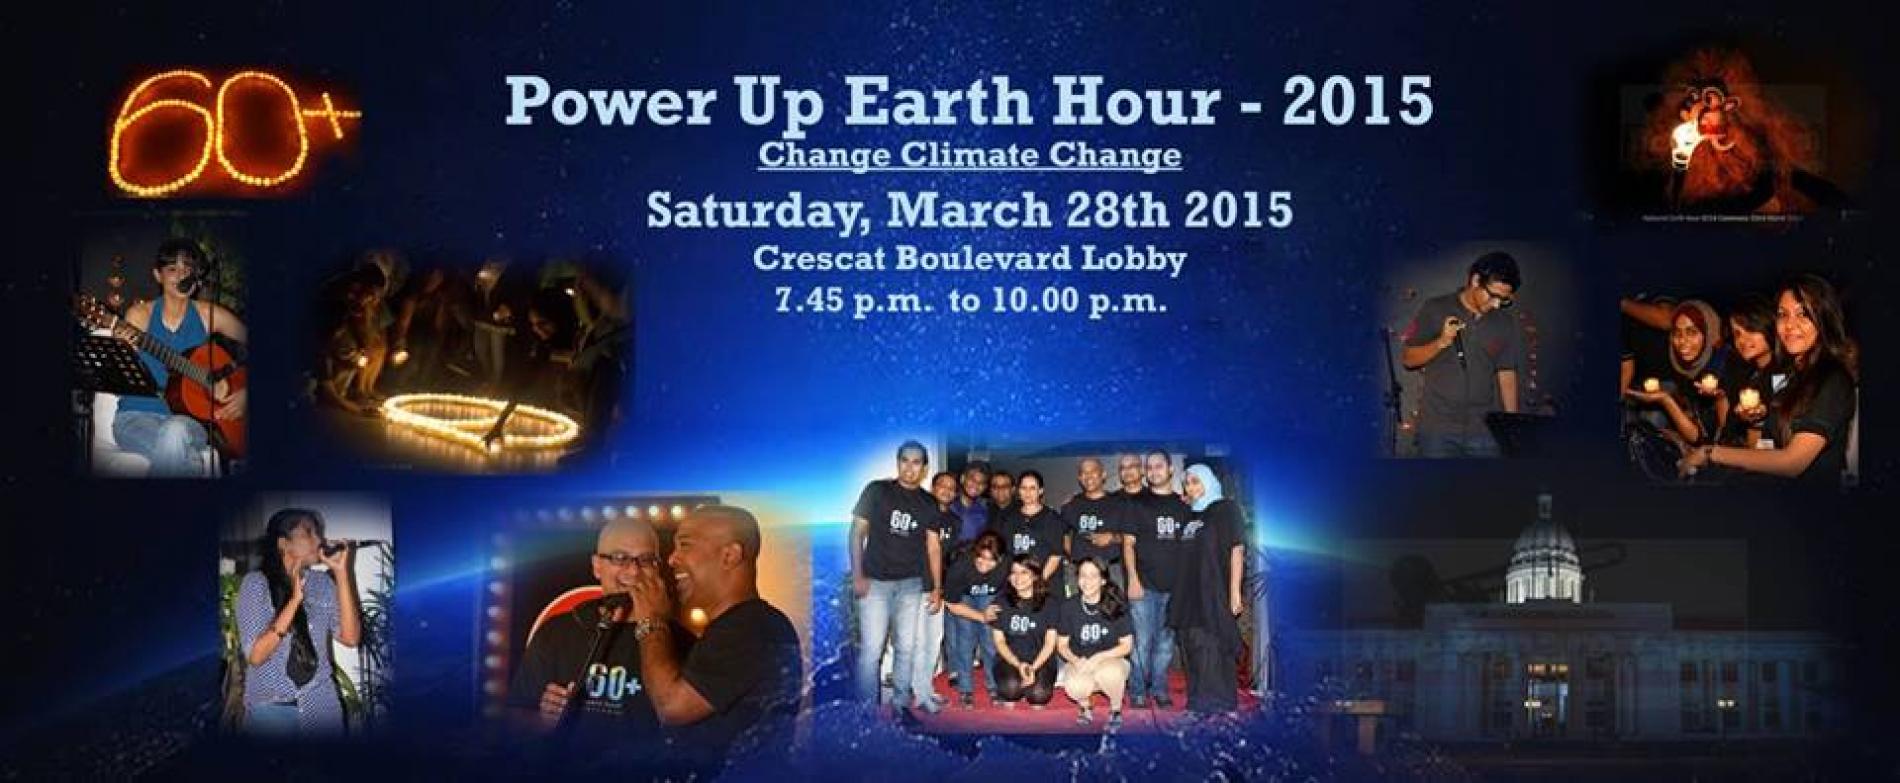 Power Up Earth Hour – 2015